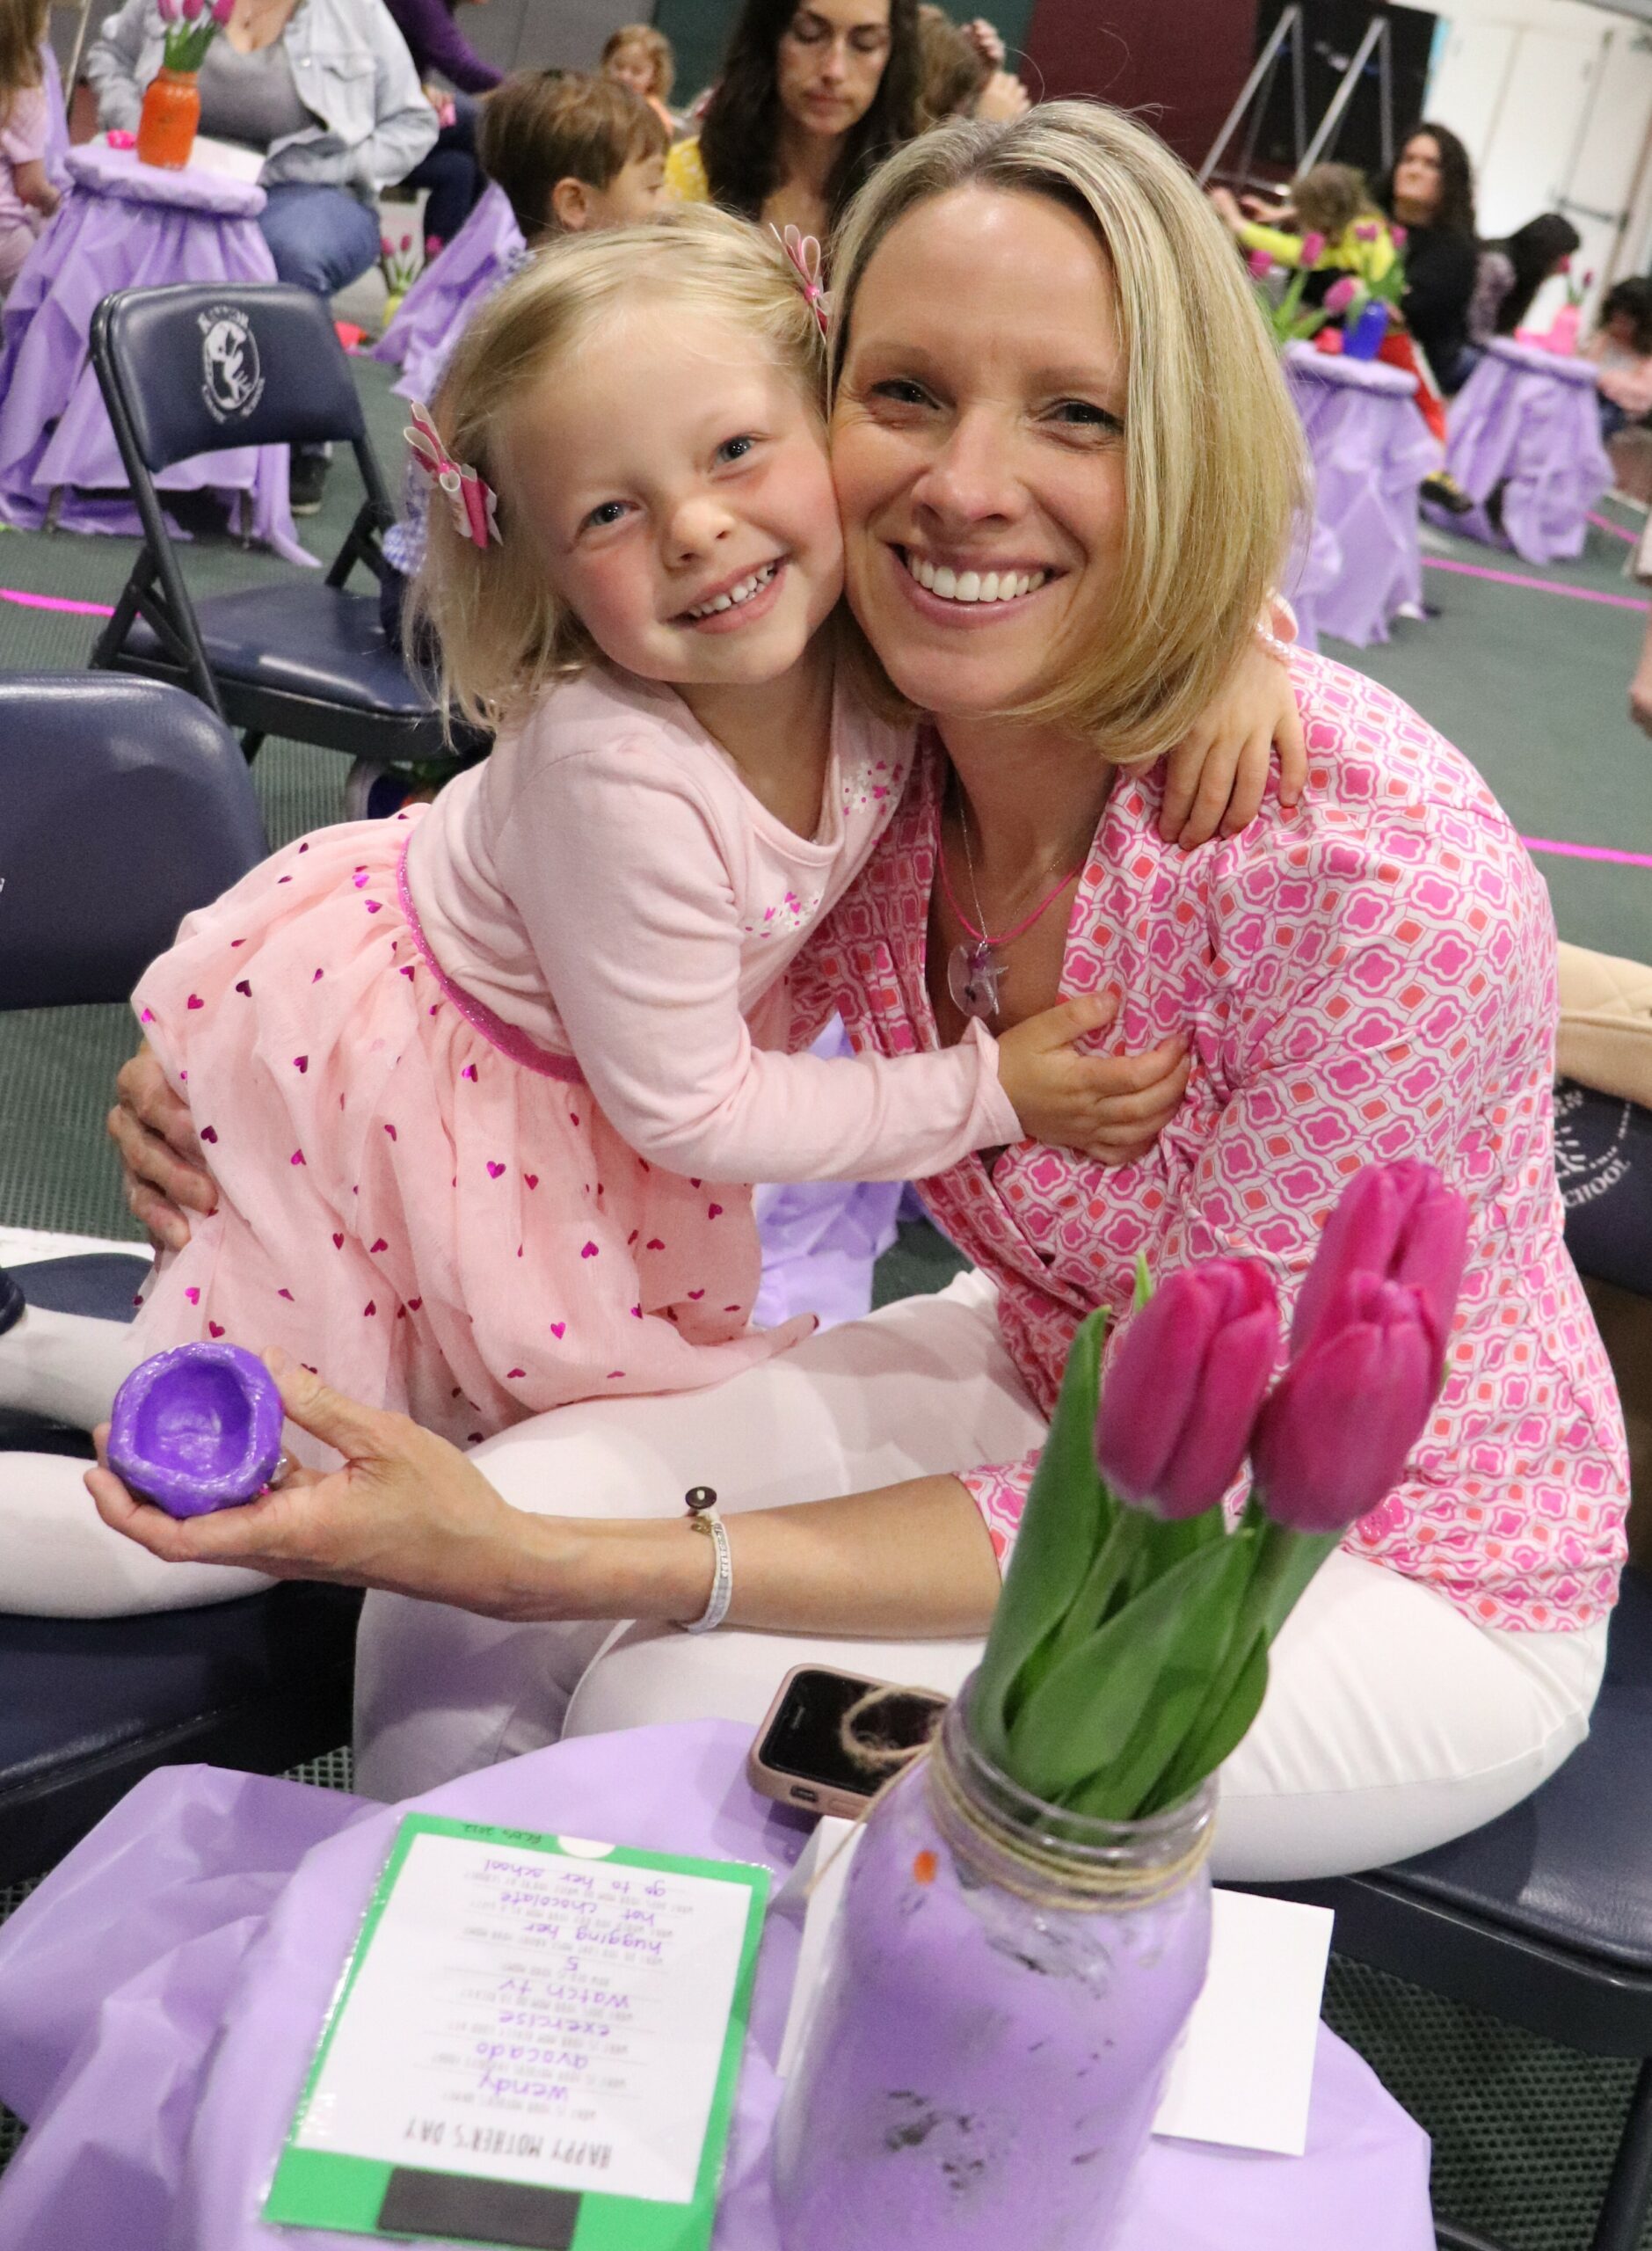 On Friday, May 6, the pre-Kindergarten students at Raynor County Day School  hosted a Mother's Day Tea Party for their mothers.   During their visit, the ladies were treated to a musical performance, tea, and tasty treats.  In addition, the children created handmade gifts for their mothers which included pinch pots, floral vases, handcrafted necklaces, and gift certificates to be redeemed for services such as putting away toys or washing the dishes.  Charlotte Turbush cuddles with her mother, Wendy Turbush, at the event. COURTESY RAYNOR COUNTRY DAY SCHOOL